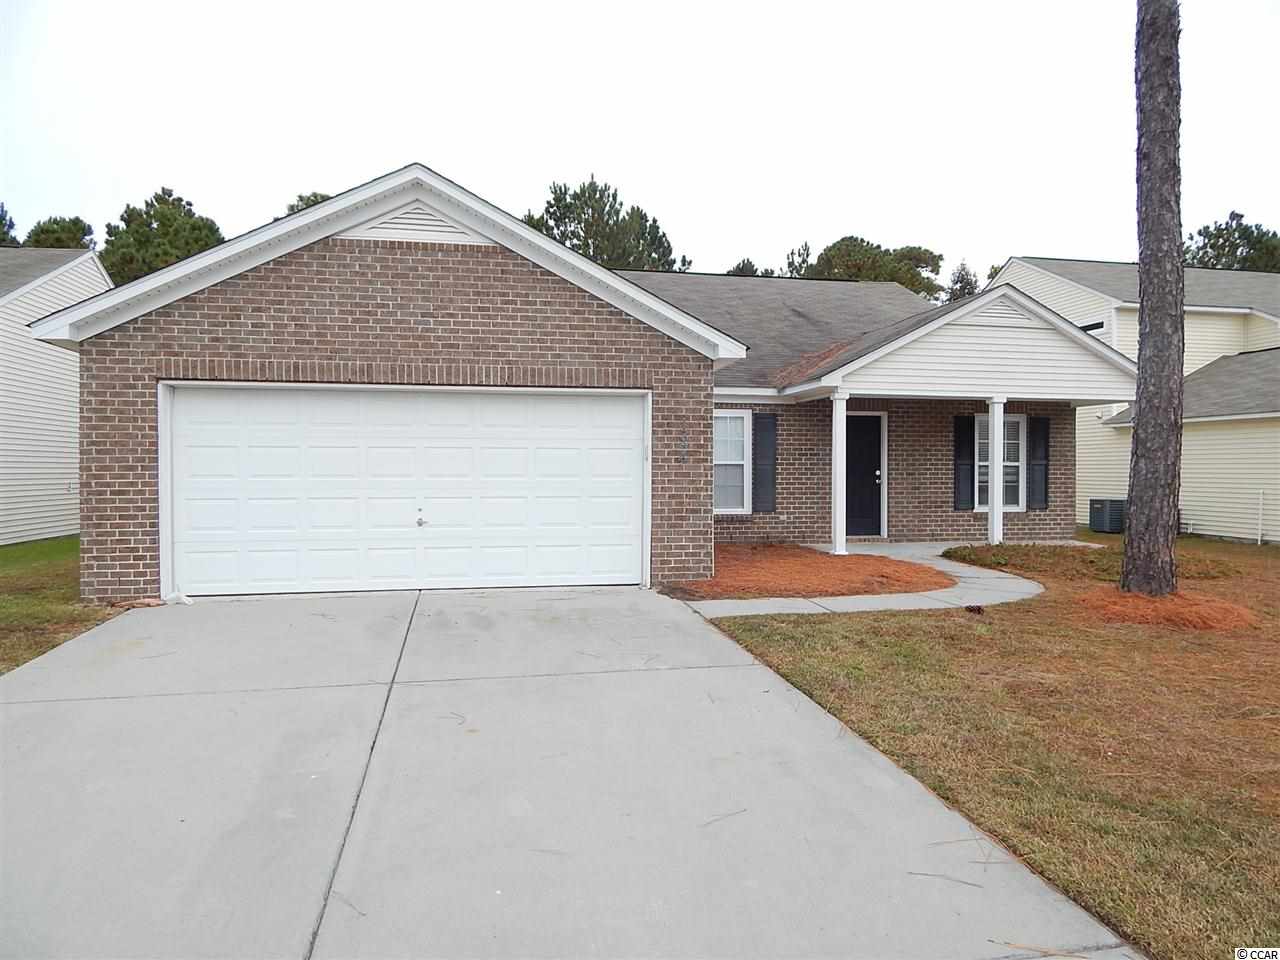 124 Weeping Willow Dr. Myrtle Beach, SC 29579